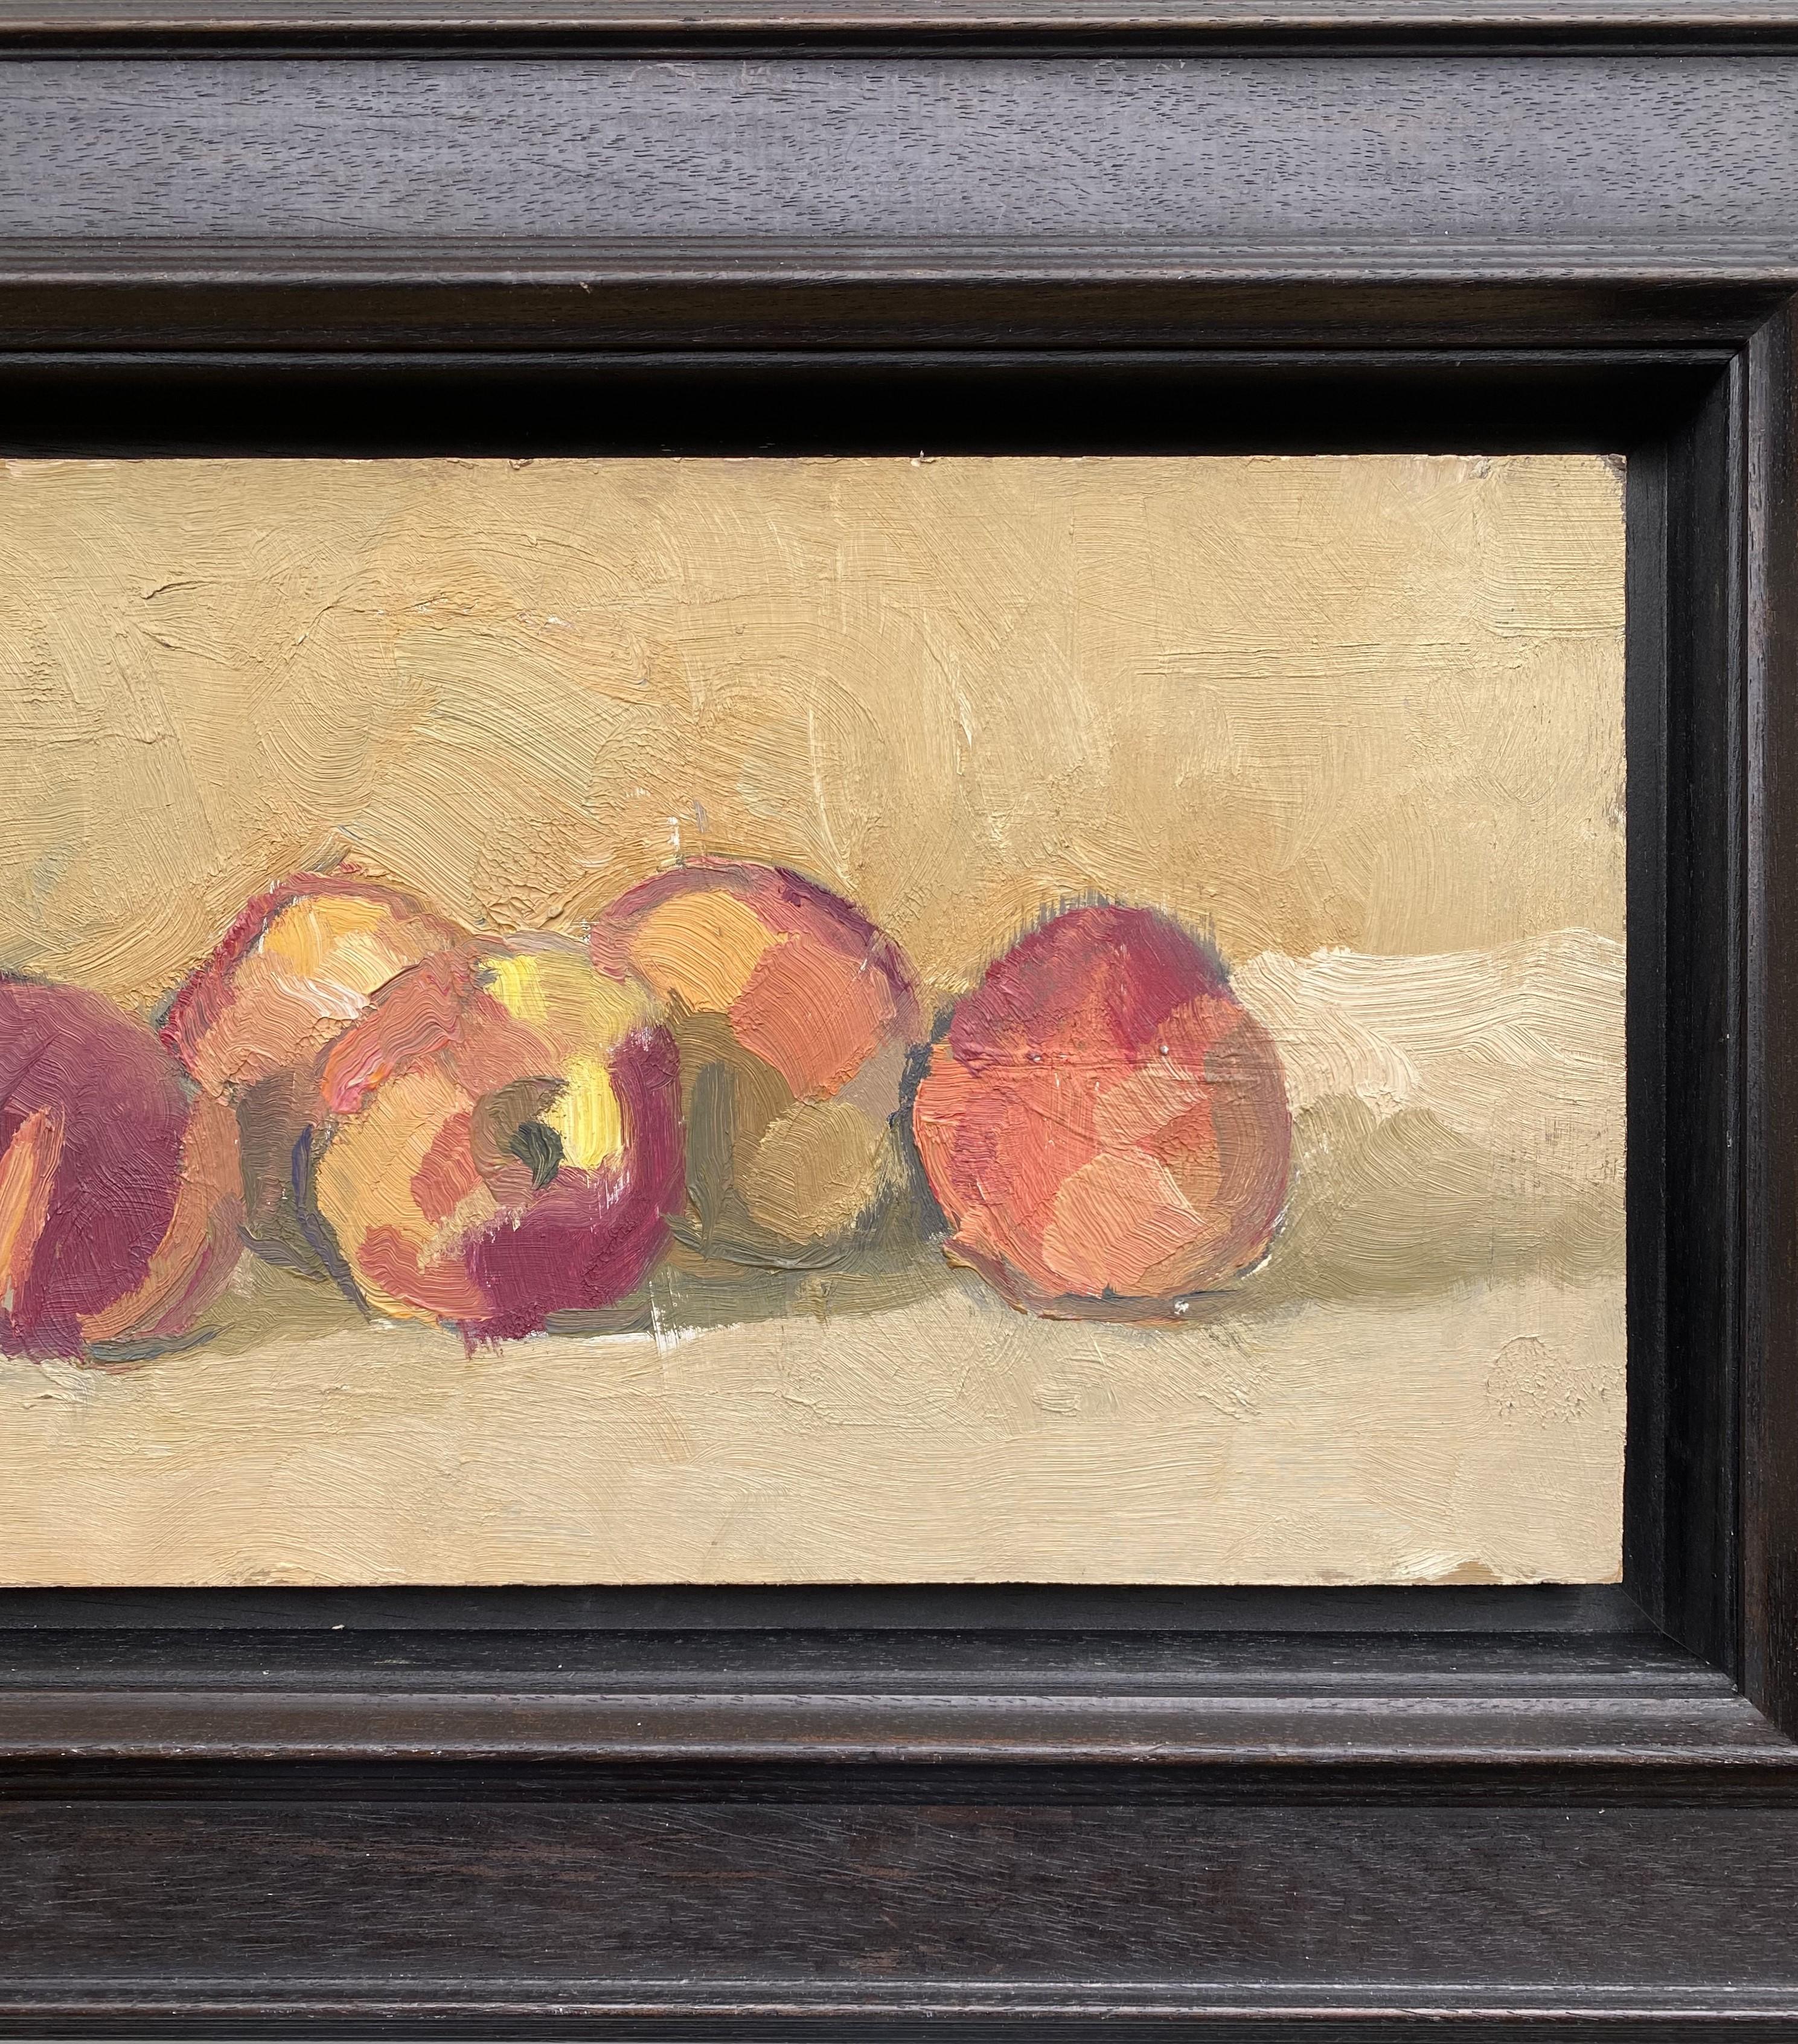 Pierre Coquet - Still life with peaches
Reference number F357
Framed with an ebony color wood floated frame.
41 x 58 cm frame included (21 x 38 cm without frame)
This work is painted with oil on a board and placed in a made to measure wood